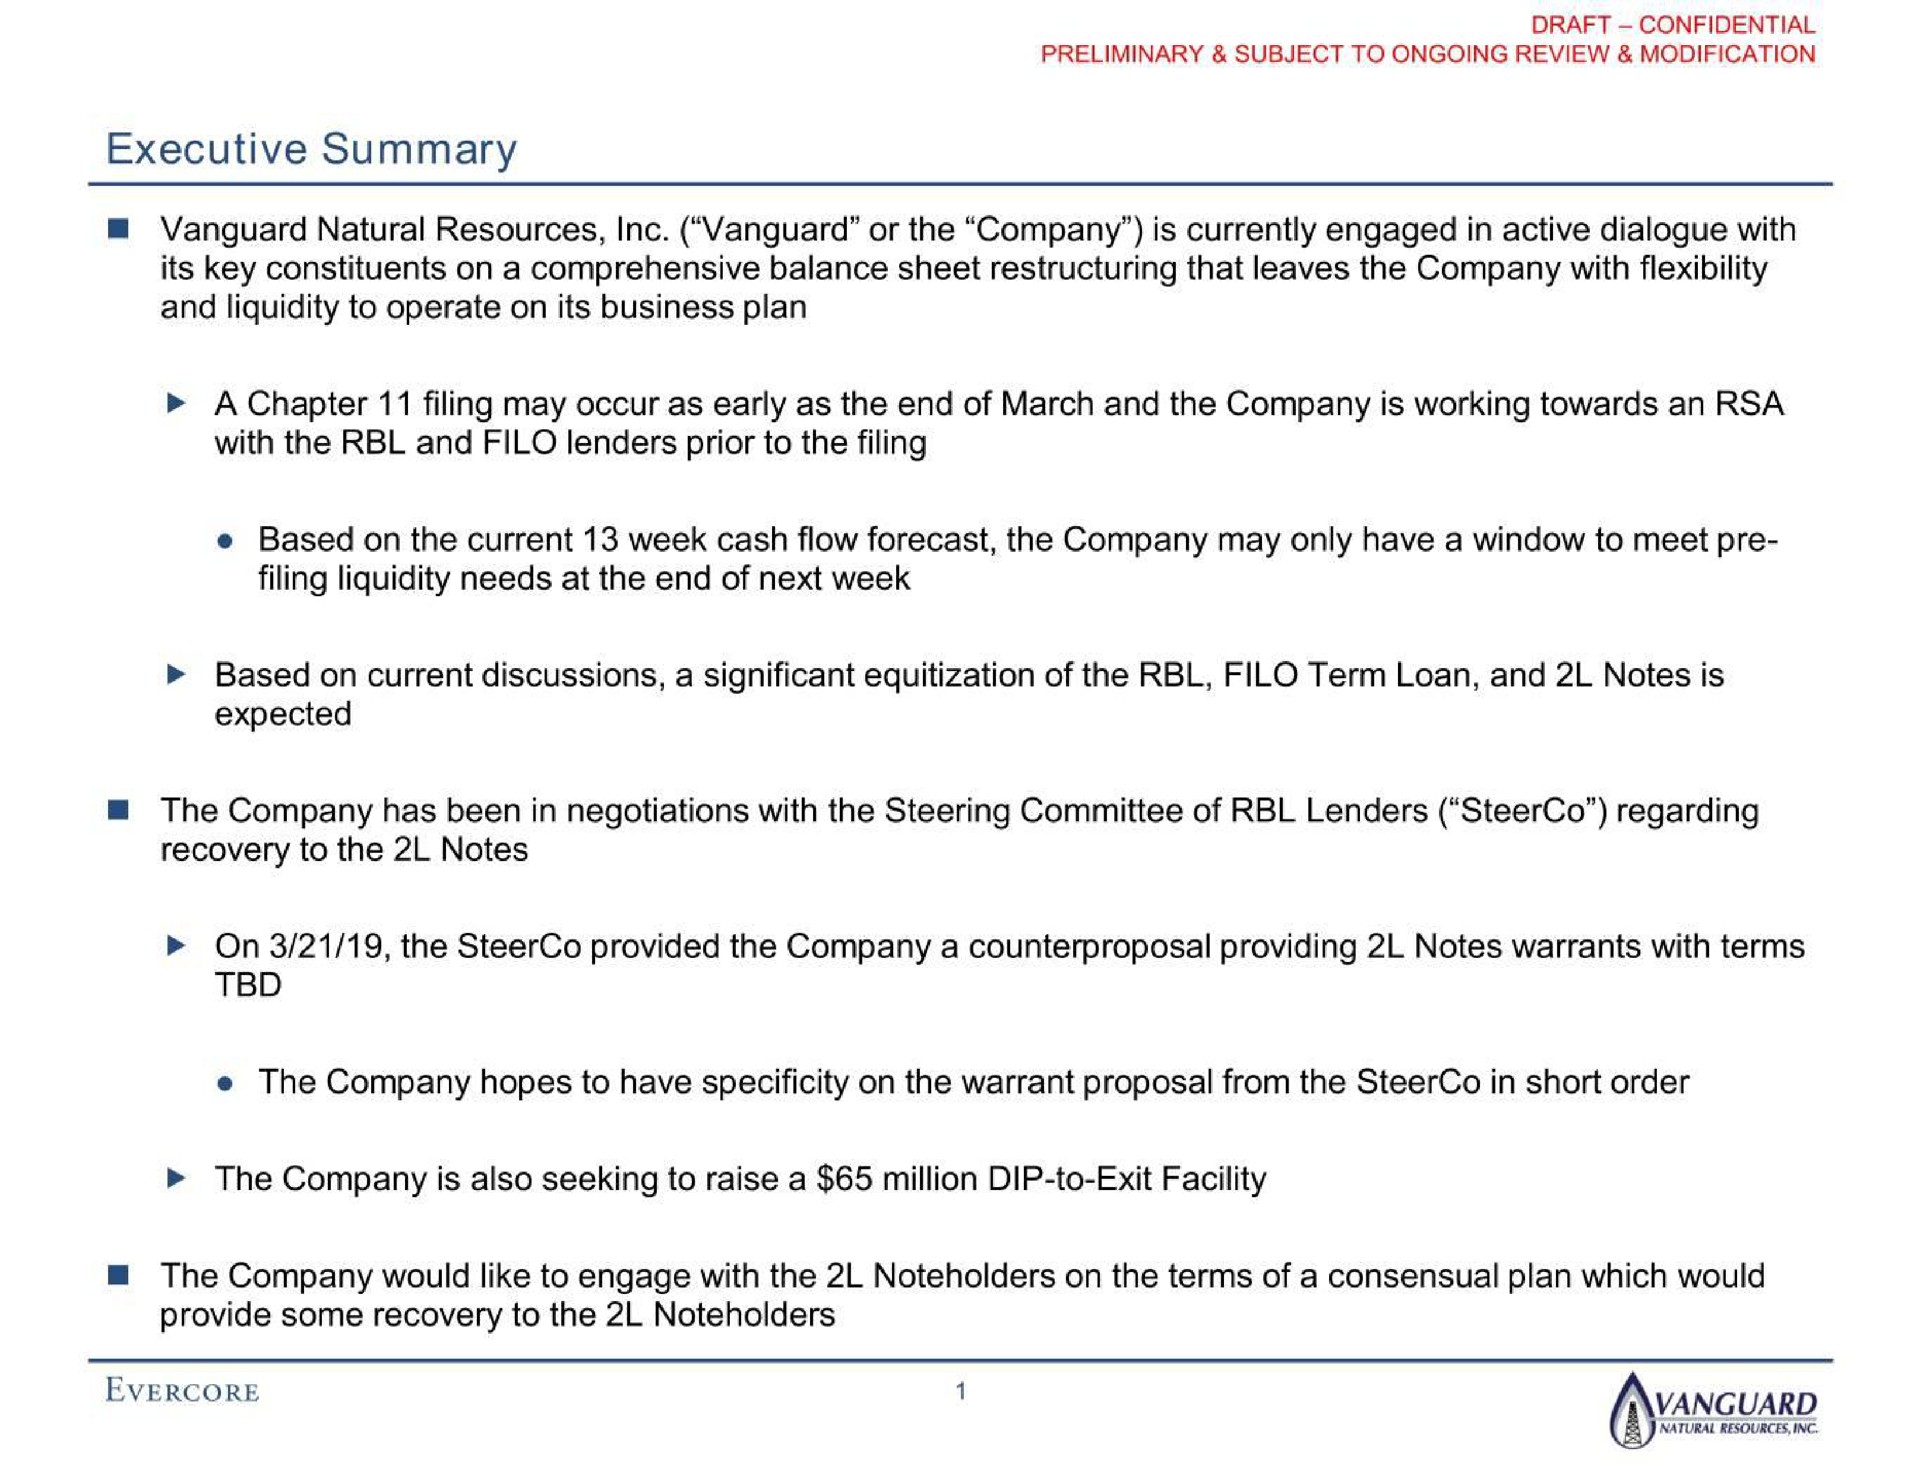 executive summary vanguard natural resources vanguard or the company is currently engaged in active dialogue with its key constituents on a comprehensive balance sheet that leaves the company with flexibility and liquidity to operate on its business plan a chapter with the and filo lenders prior to the filing filing may occur as early as the end of march and the company is working towards an based on the current week cash flow forecast the company may only have a window to meet filing liquidity needs at the end of next week based on current discussions a significant of the filo term loan and notes is expected the company has been in negotiations with the steering committee of lenders regarding recovery to the notes on the provided the company a counterproposal providing notes warrants with terms the company hopes to have specificity on the warrant proposal from the in short order the company is also seeking to raise a million dip to exit facility the company would like to engage with the on the terms of a consensual plan which would provide some recovery to the | Evercore